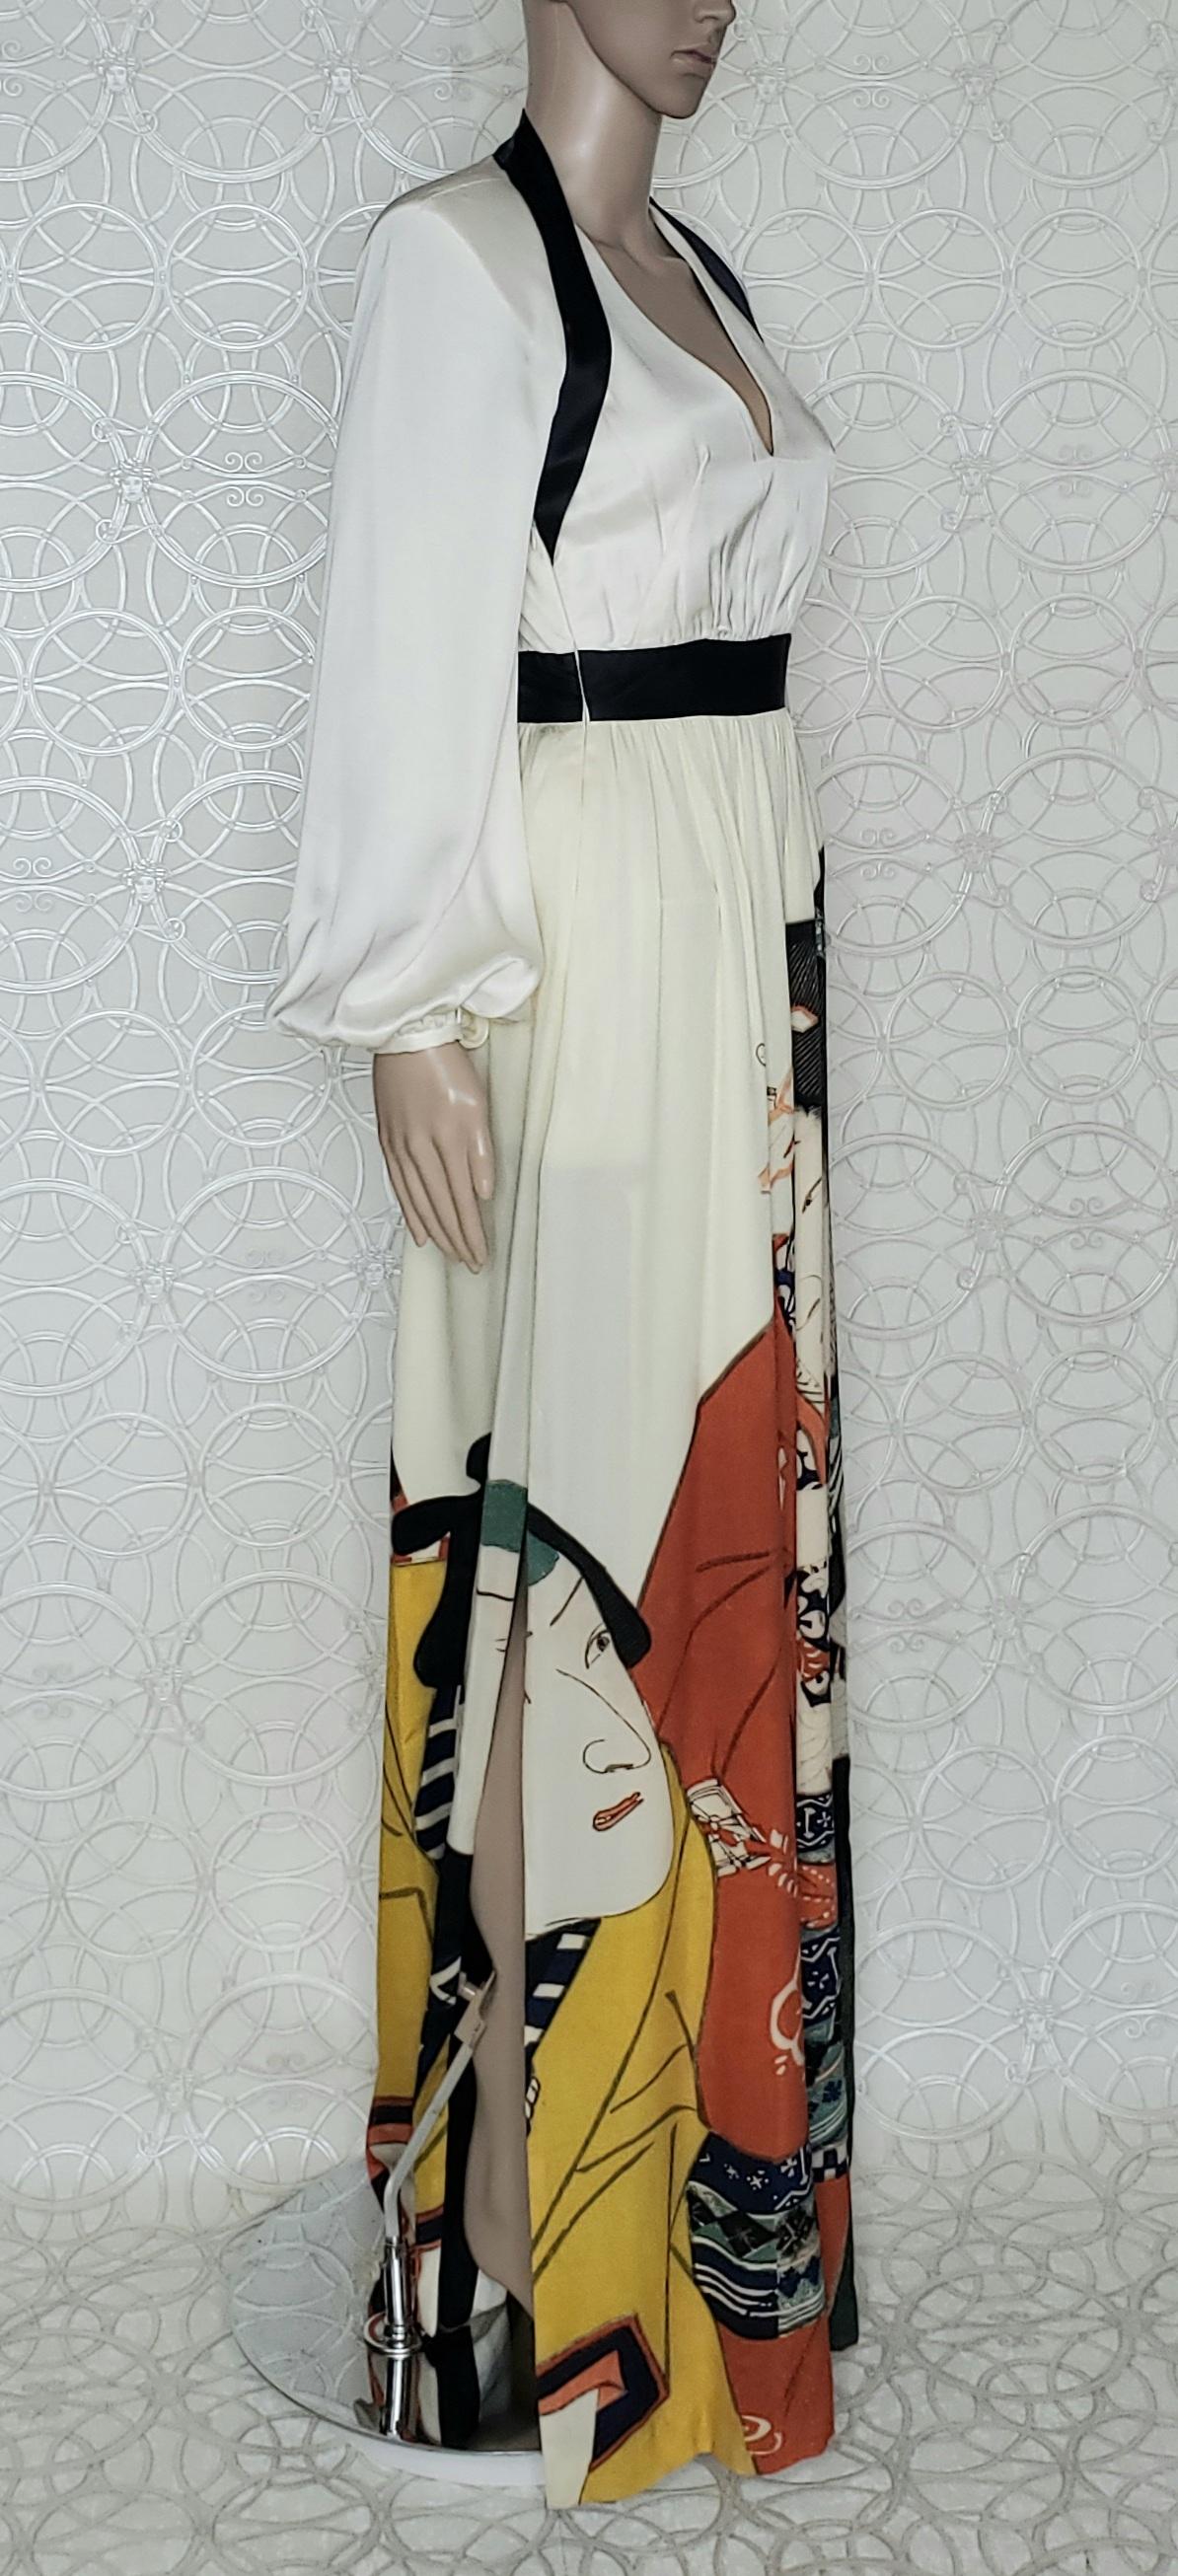 DRIES Van NOTEN Fall 2012 SILK DRESS size 36 - S In Excellent Condition For Sale In Montgomery, TX